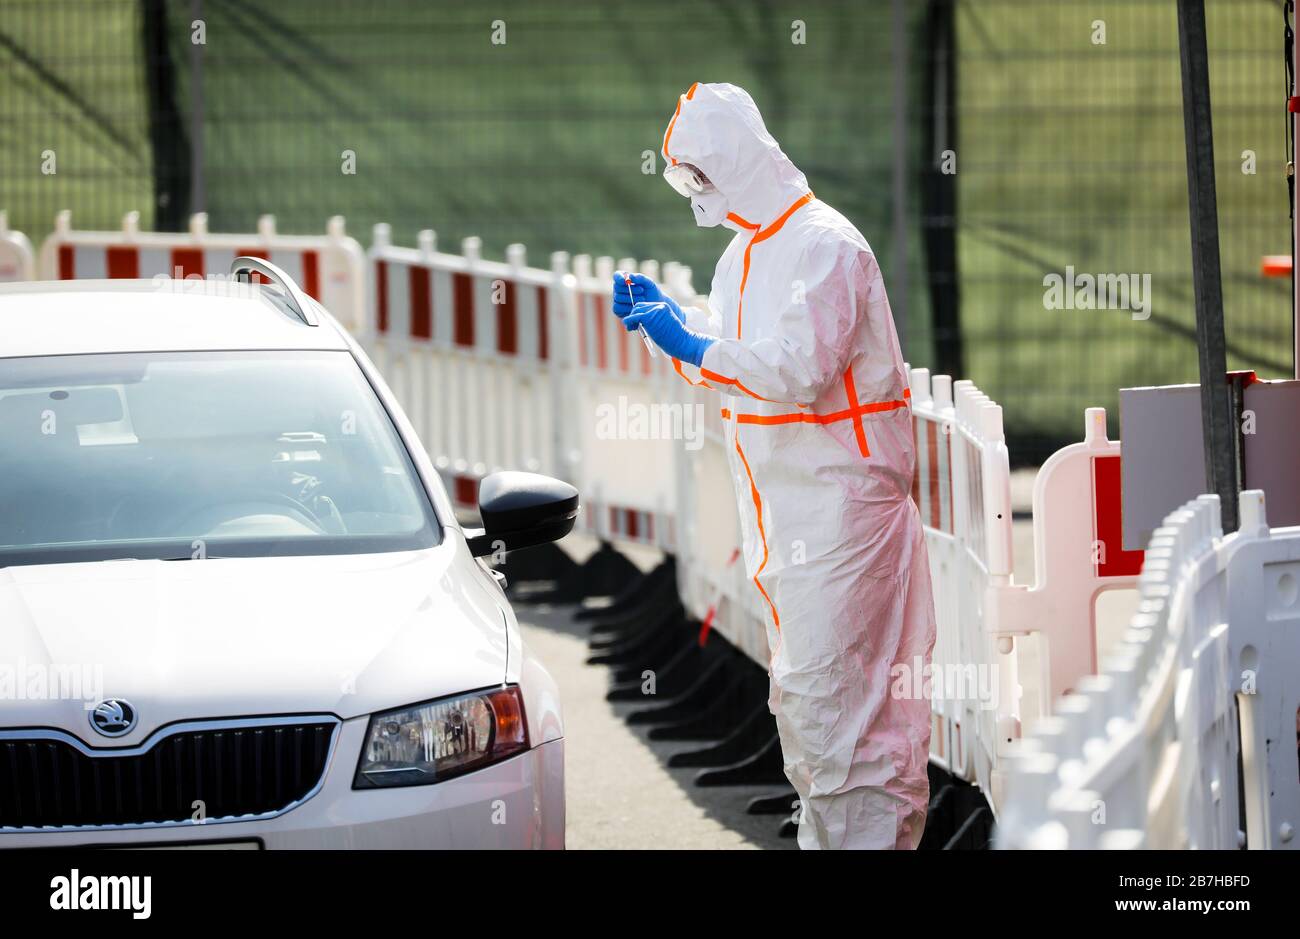 16.03.2020, Oberhausen, Ruhr area, North Rhine-Westphalia, Germany - Drive-in for coronavirus test, at the mobile test station a doctor takes a smear Stock Photo